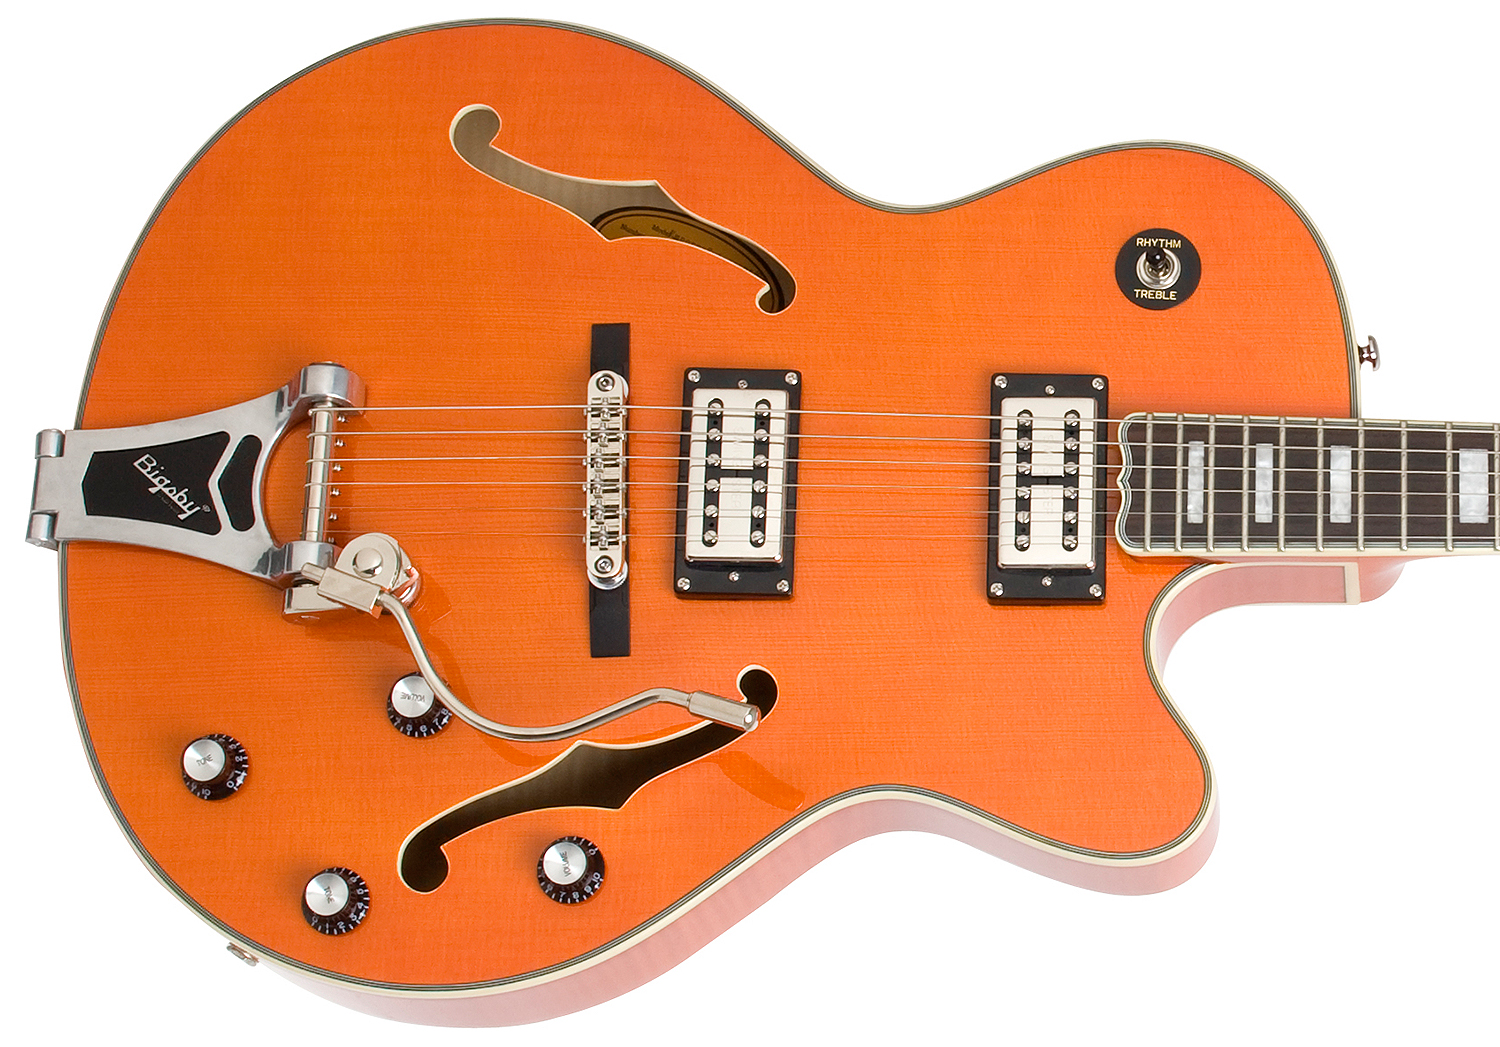 Epiphone Emperor Swingster Bigsby Gh - Sunrise Orange - Hollow-body electric guitar - Variation 2